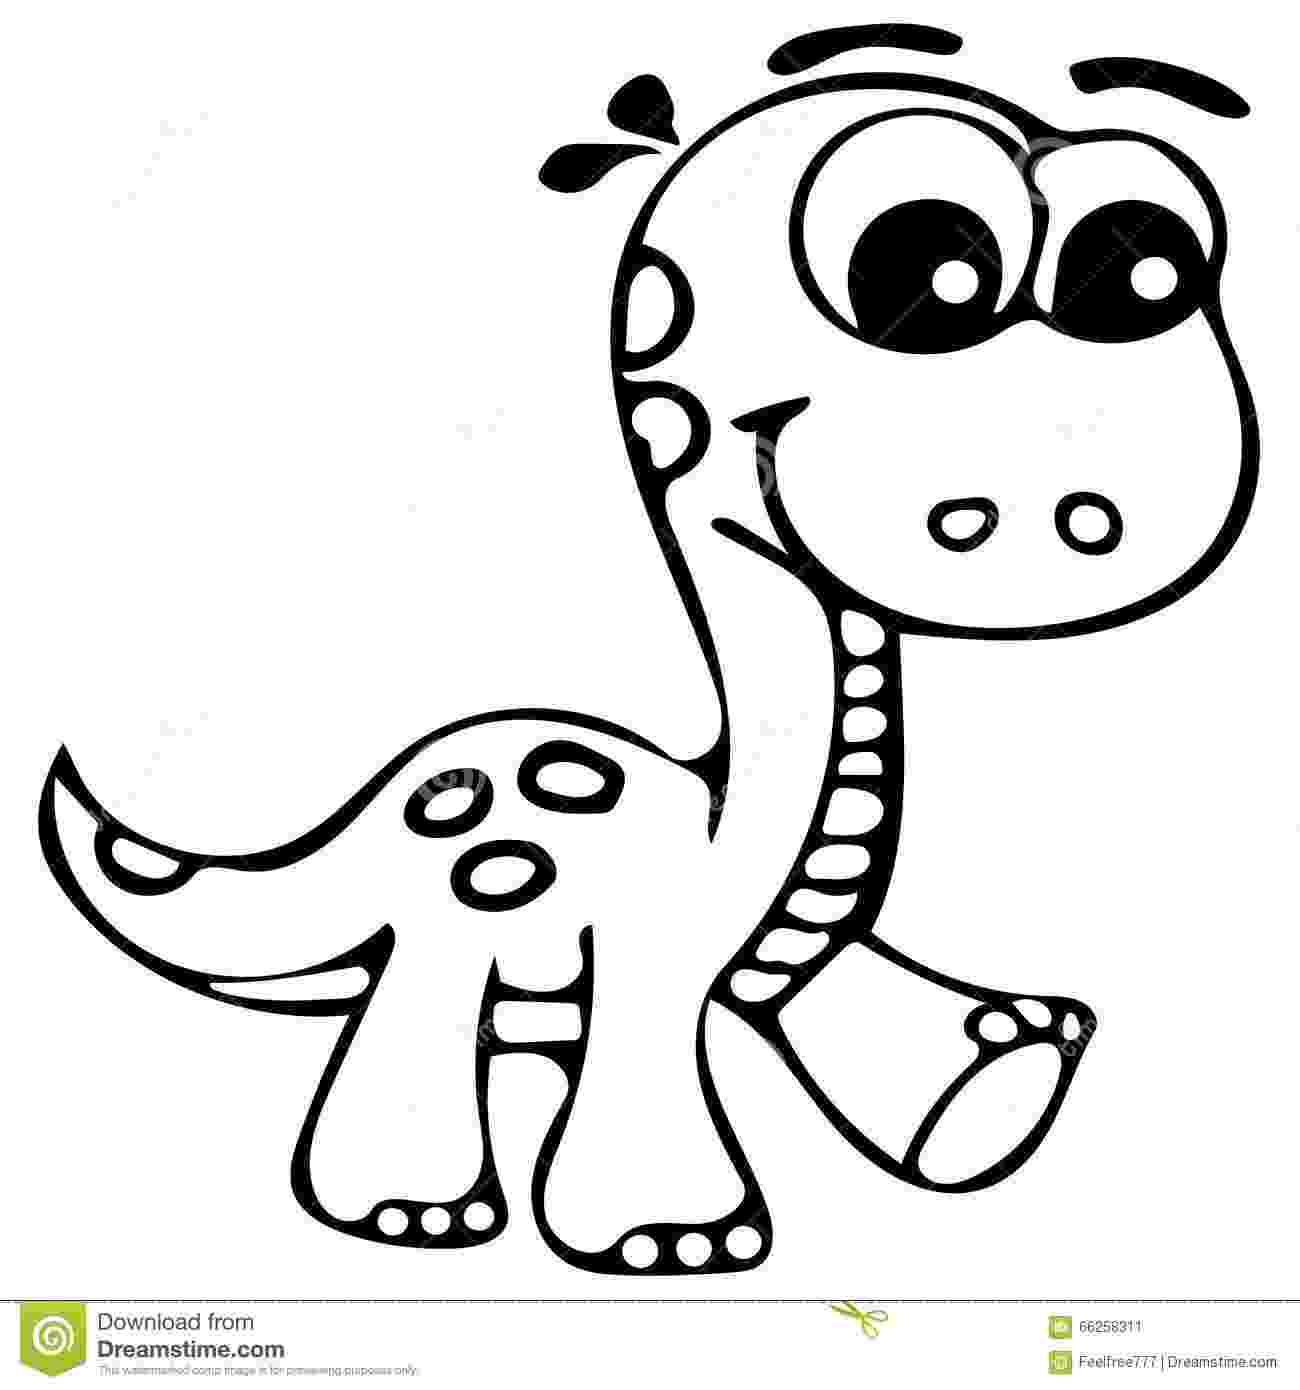 dinosaurs pictures דף צביעה דינוזאור רקס dinosaur coloring pages pictures dinosaurs 